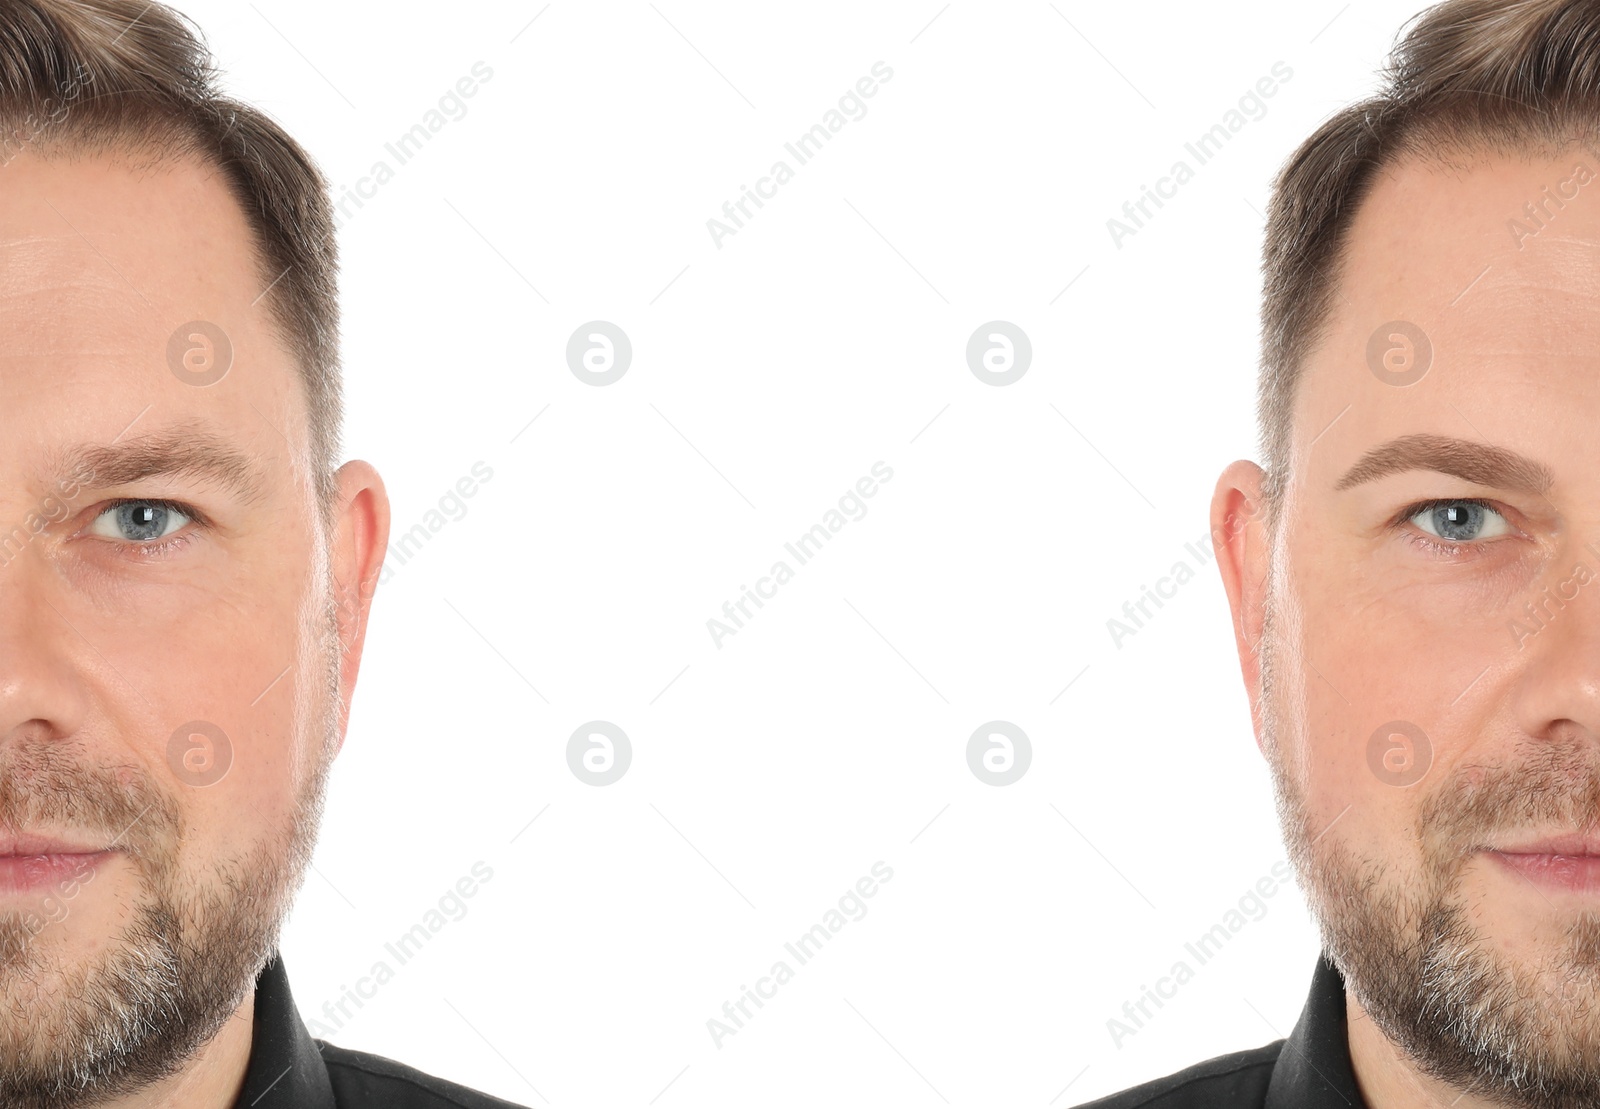 Image of Man before and after eyebrow modeling on white background, collage